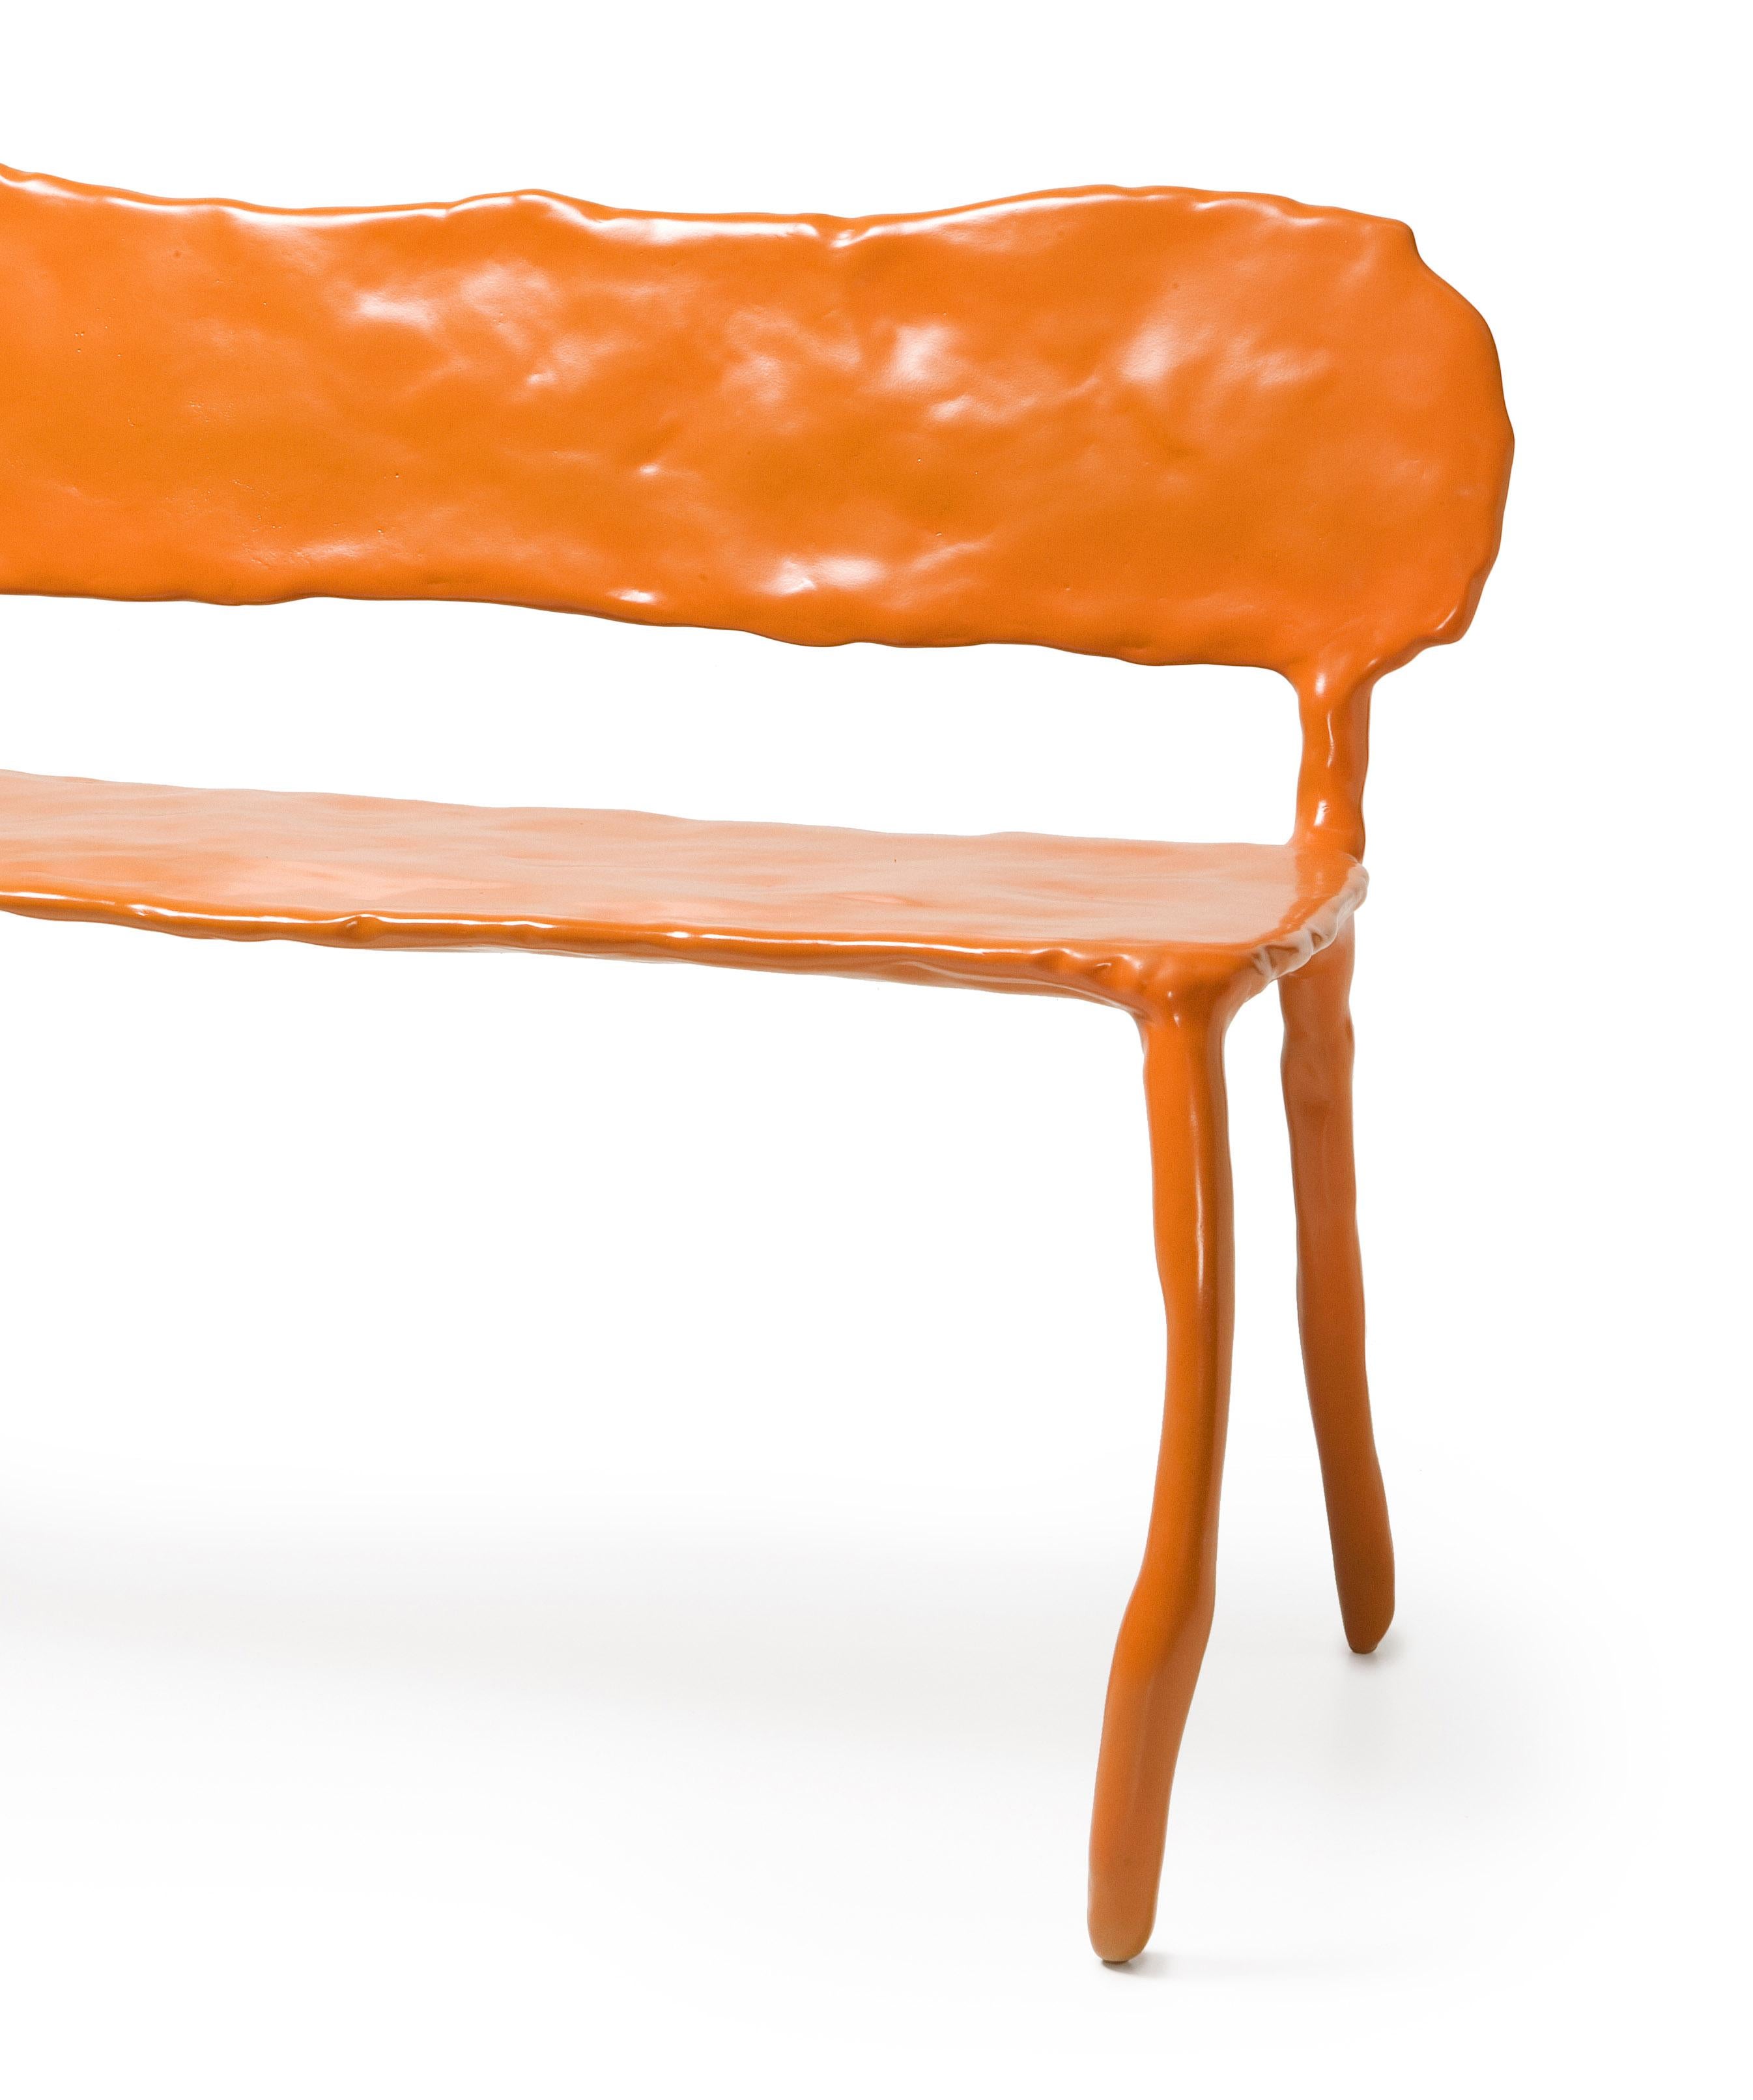 Modern Contemporary Clay Bench by Maarten Baas For Sale